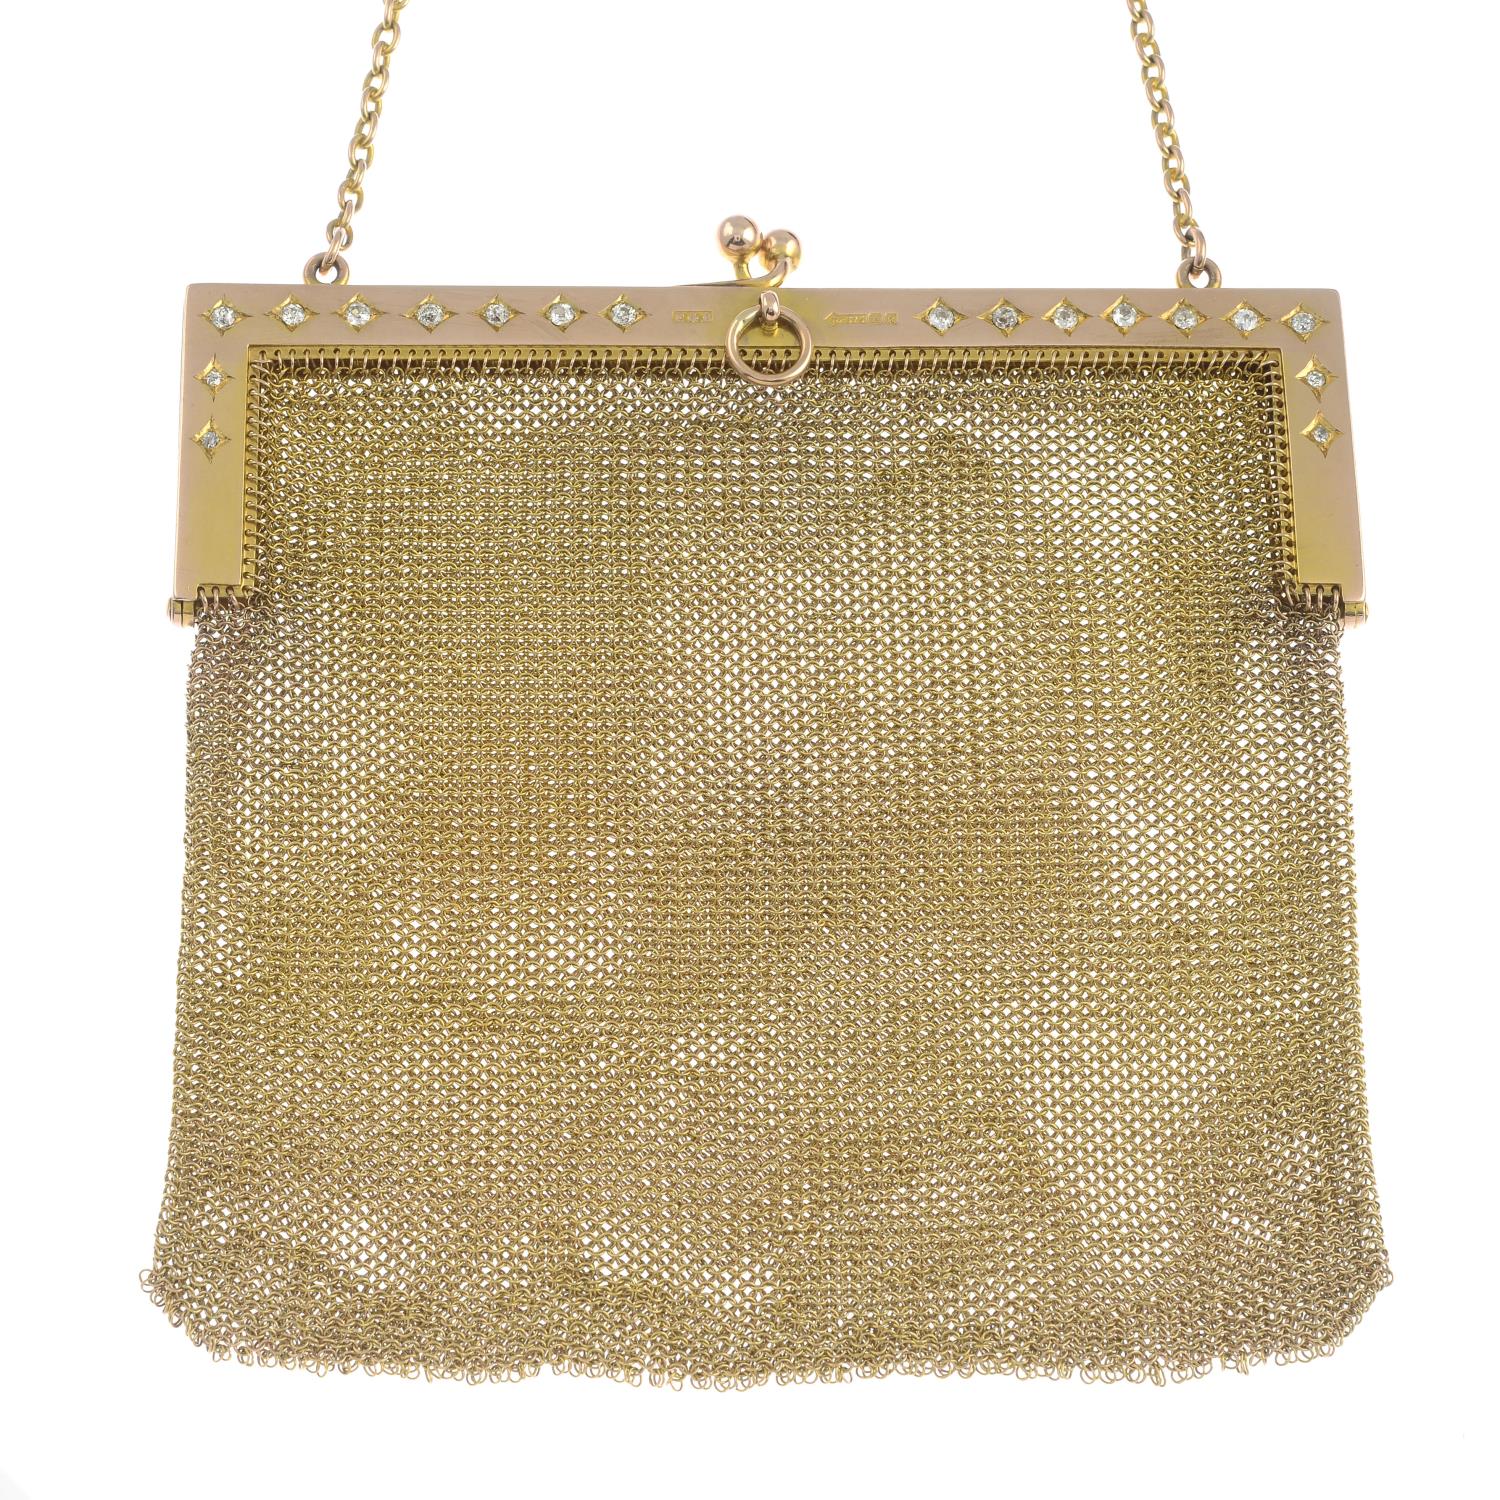 An Edwardian 9ct gold mesh-link purse, with old-cut diamond highlights. - Image 2 of 3